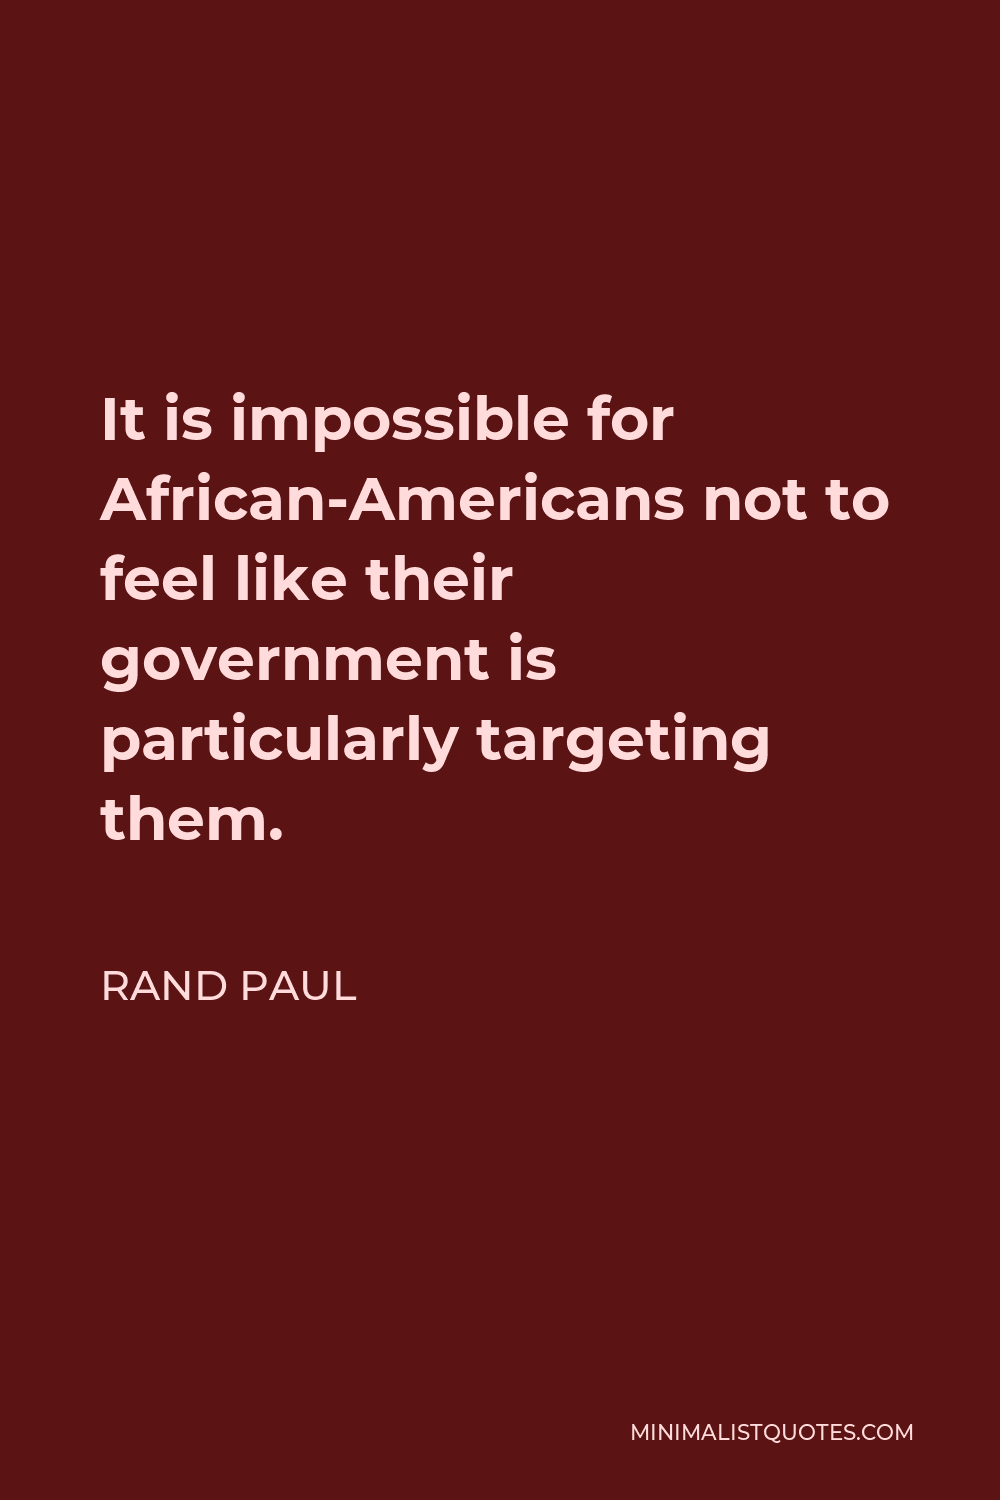 Rand Paul Quote - It is impossible for African-Americans not to feel like their government is particularly targeting them.